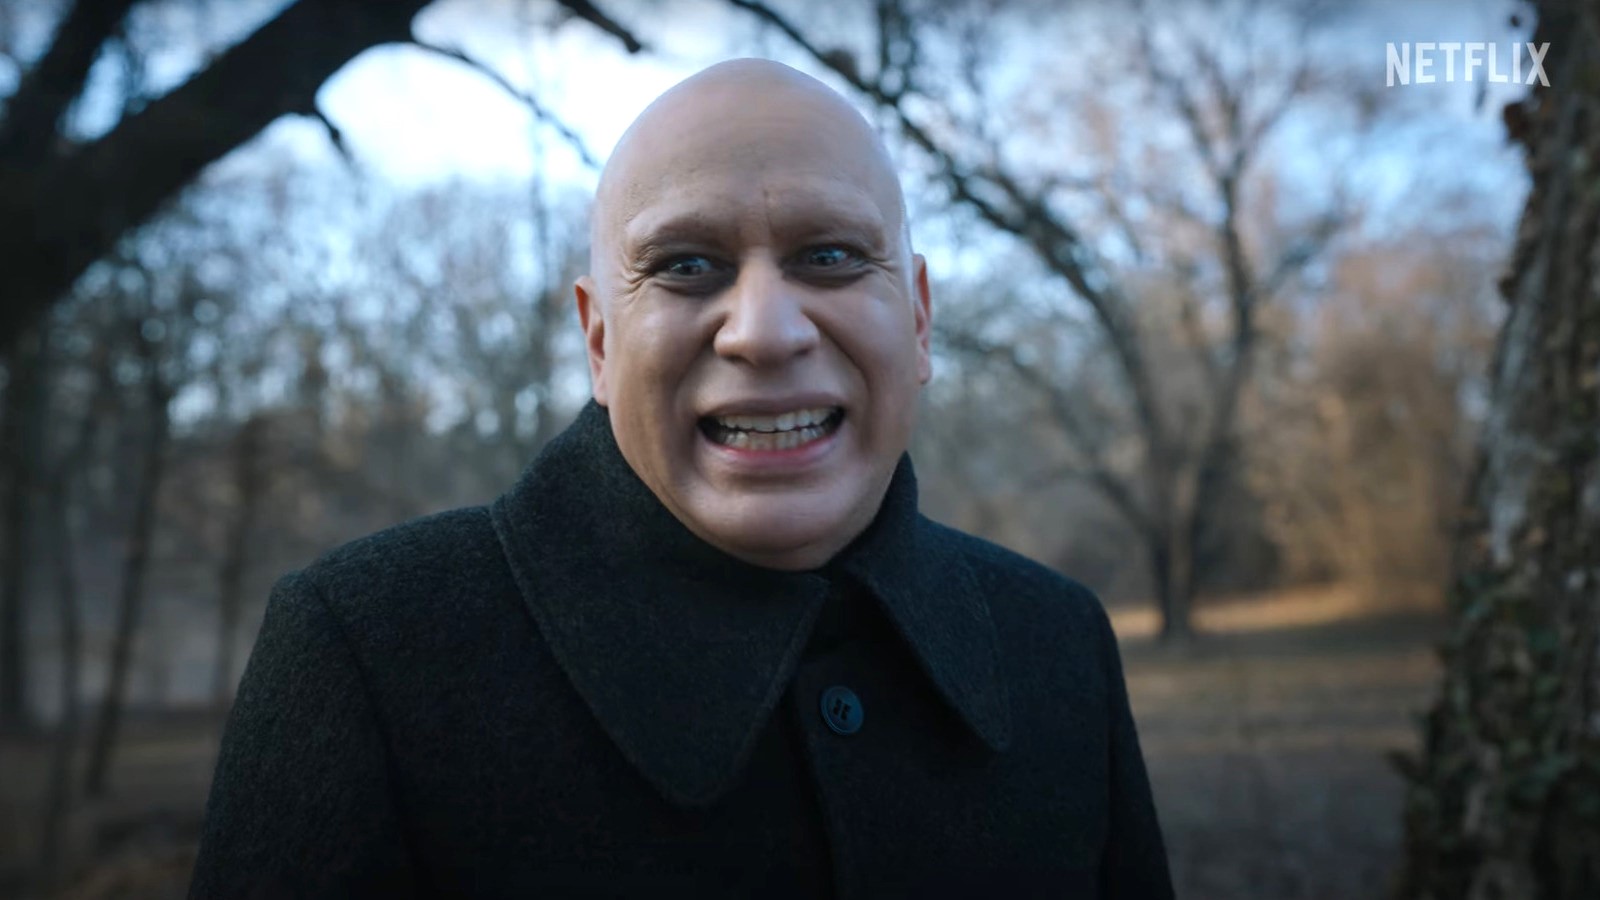 Fred Armisen as Uncle Fester Addams in 'Wednesday'